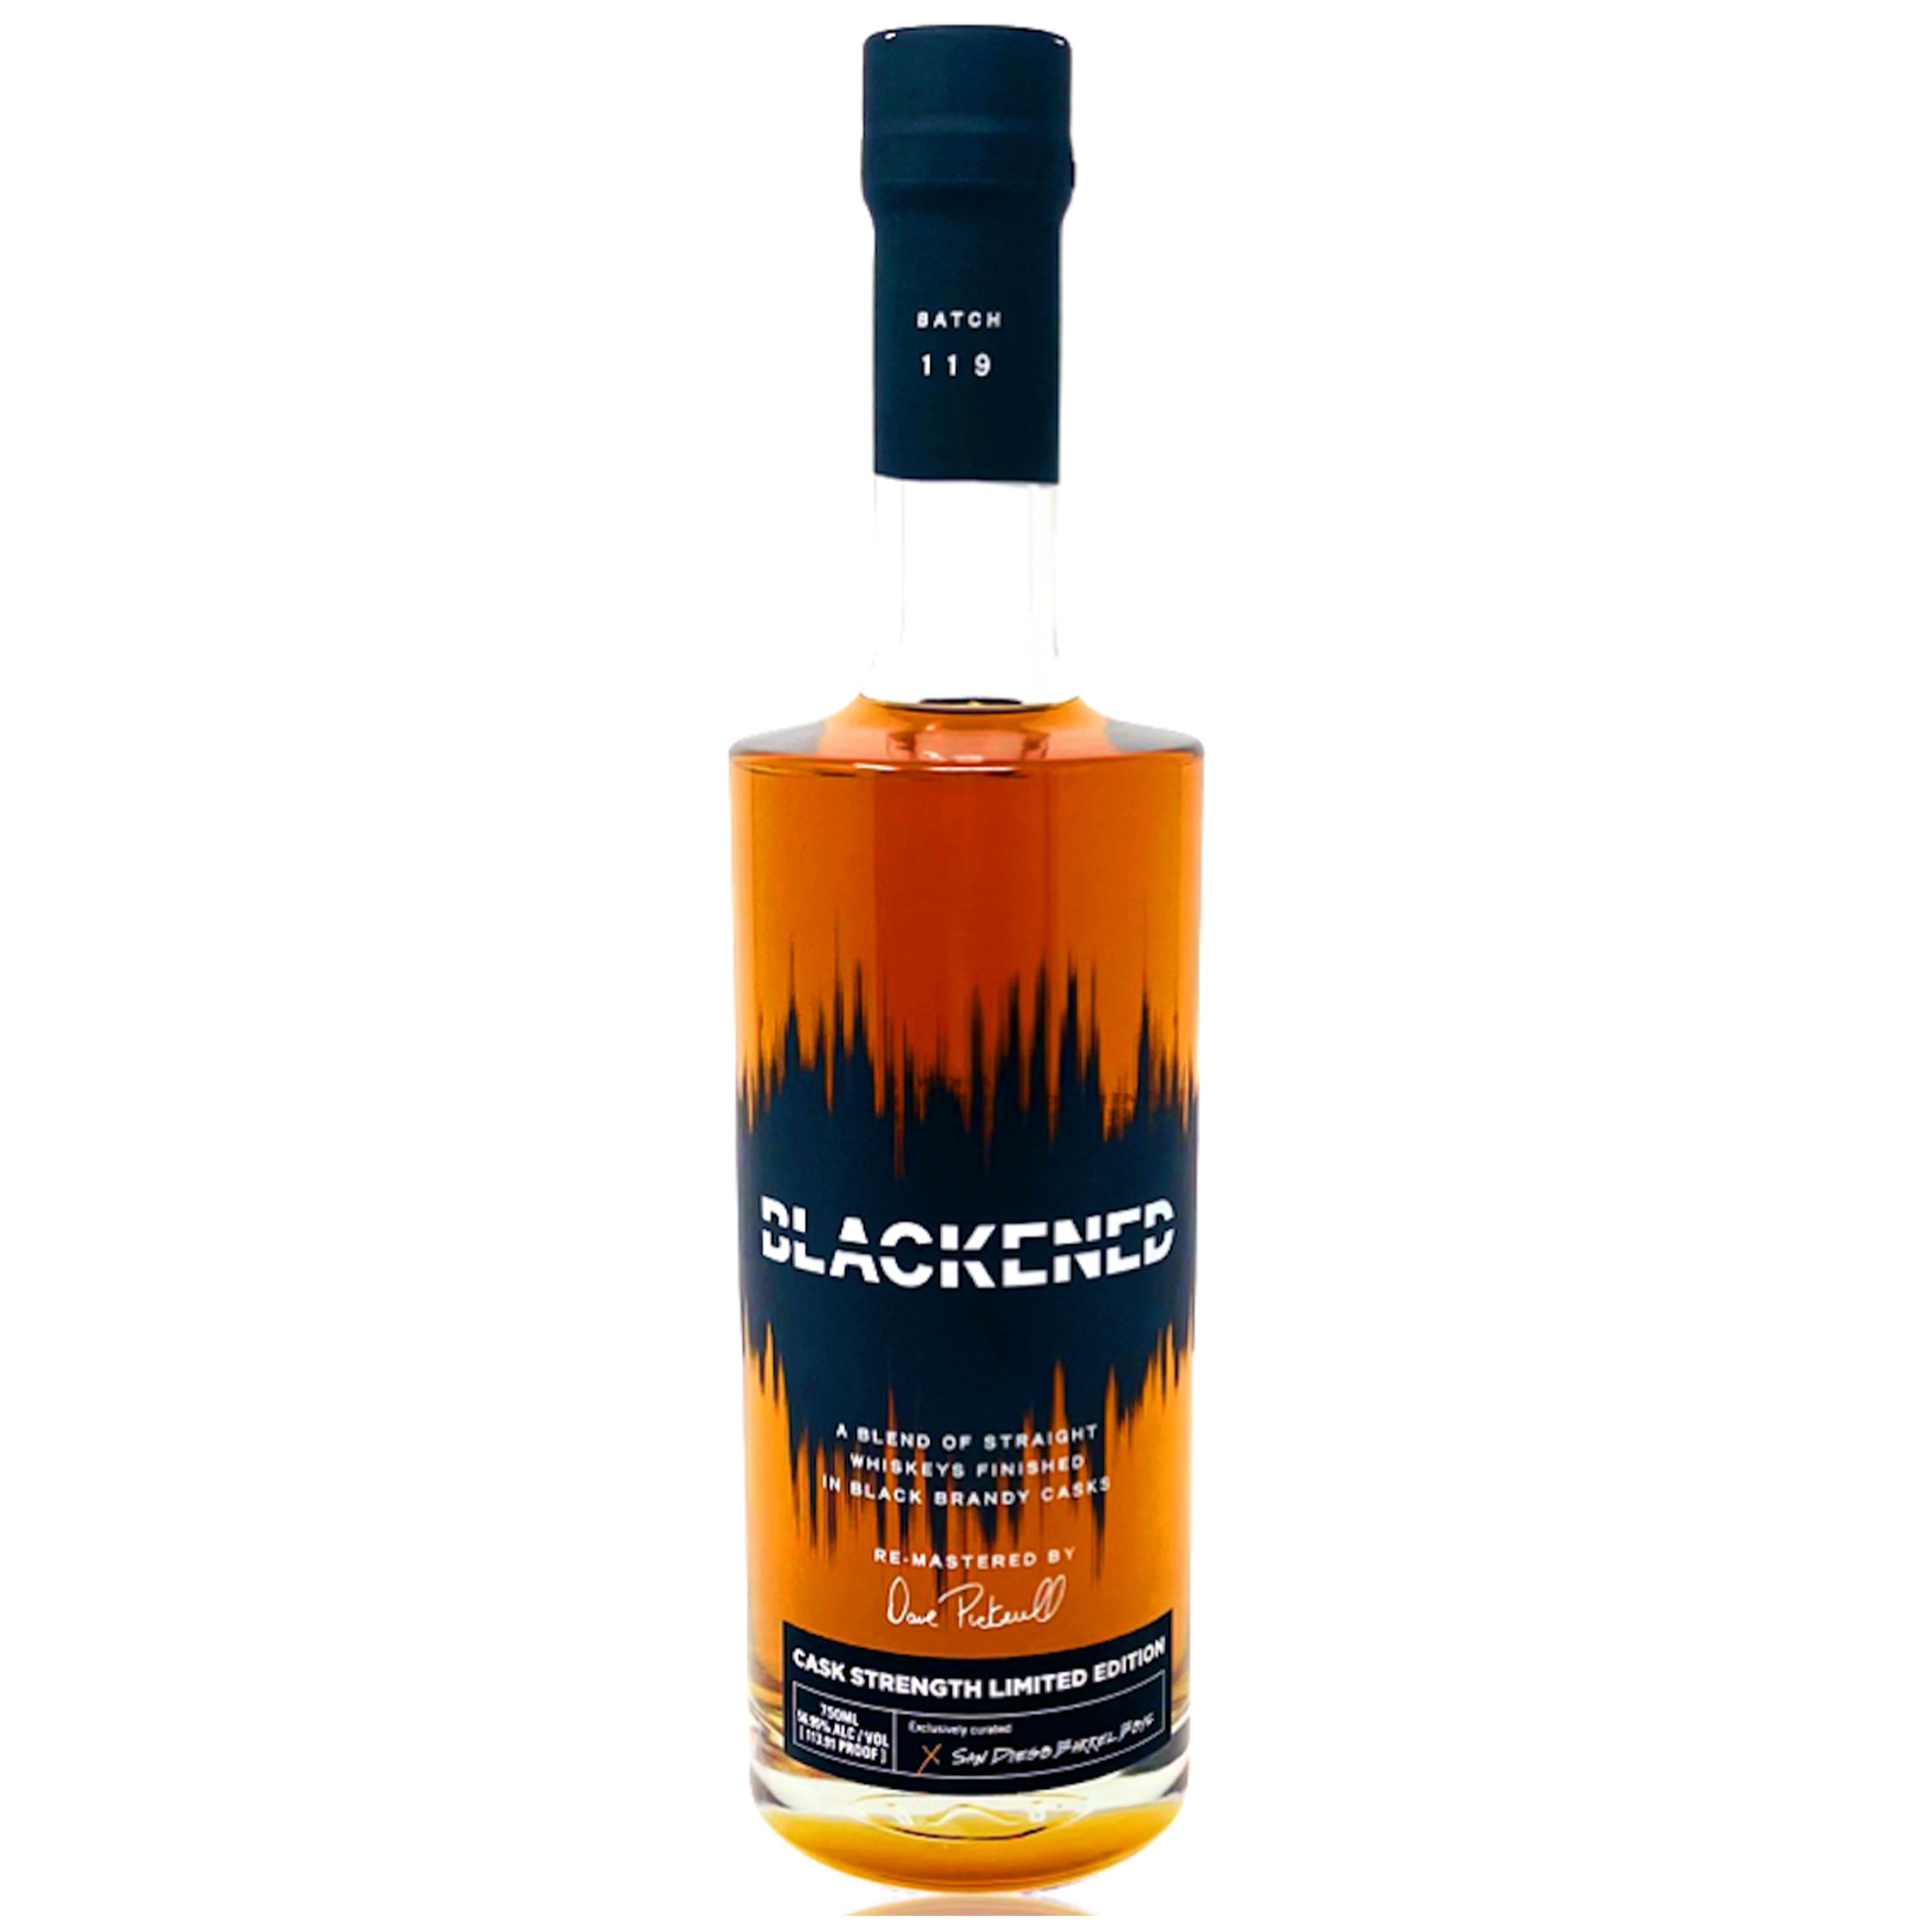 Blackened Cask Strength Limited Edition - SDBB Private Selection